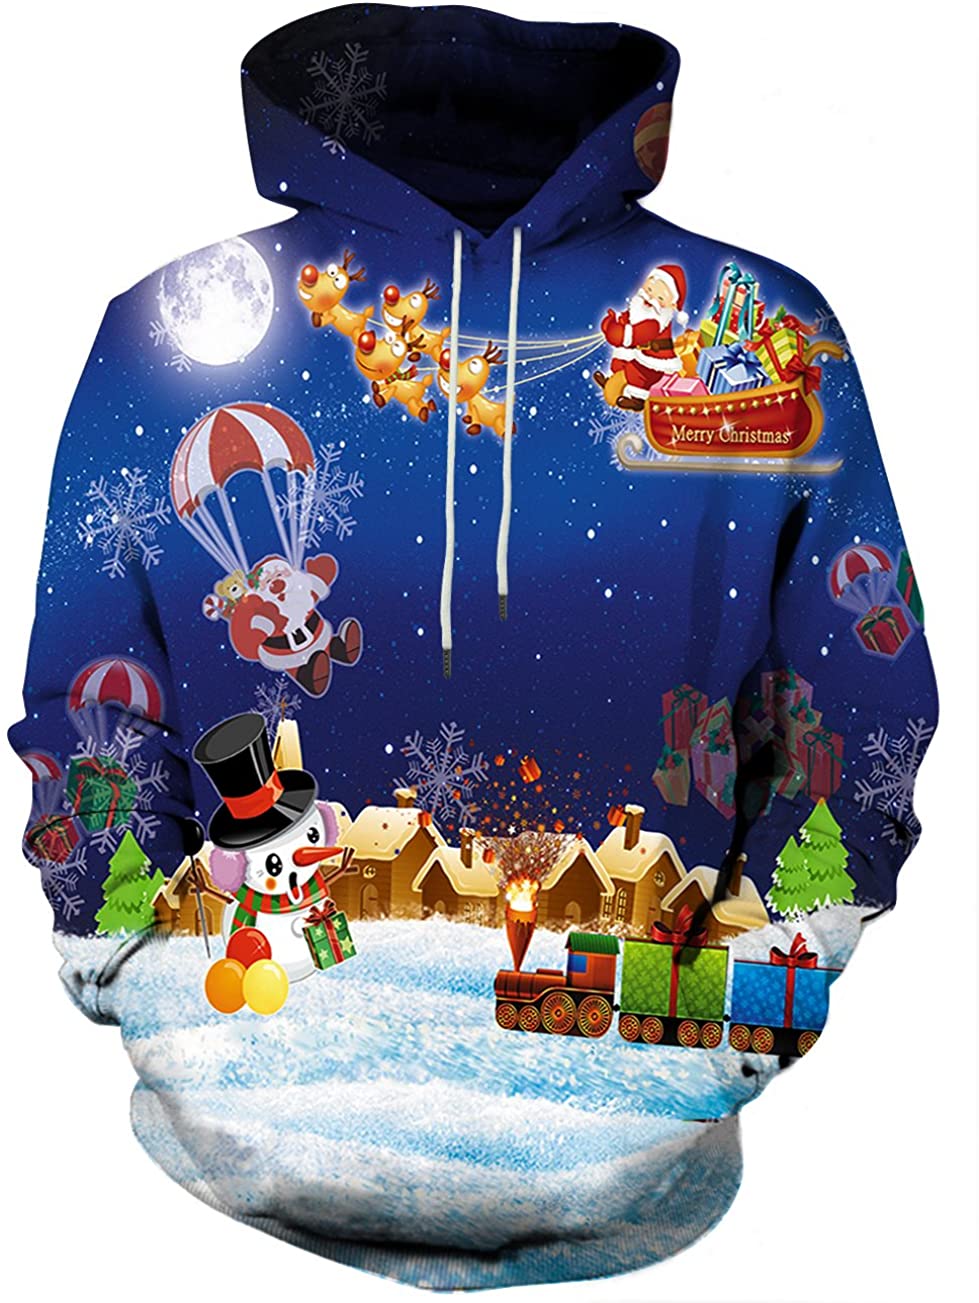 Hgvoetty Unisex 3D Novelty Hoodies for Men Women Cool Graphic Pullover Sweatshirts with Pockets